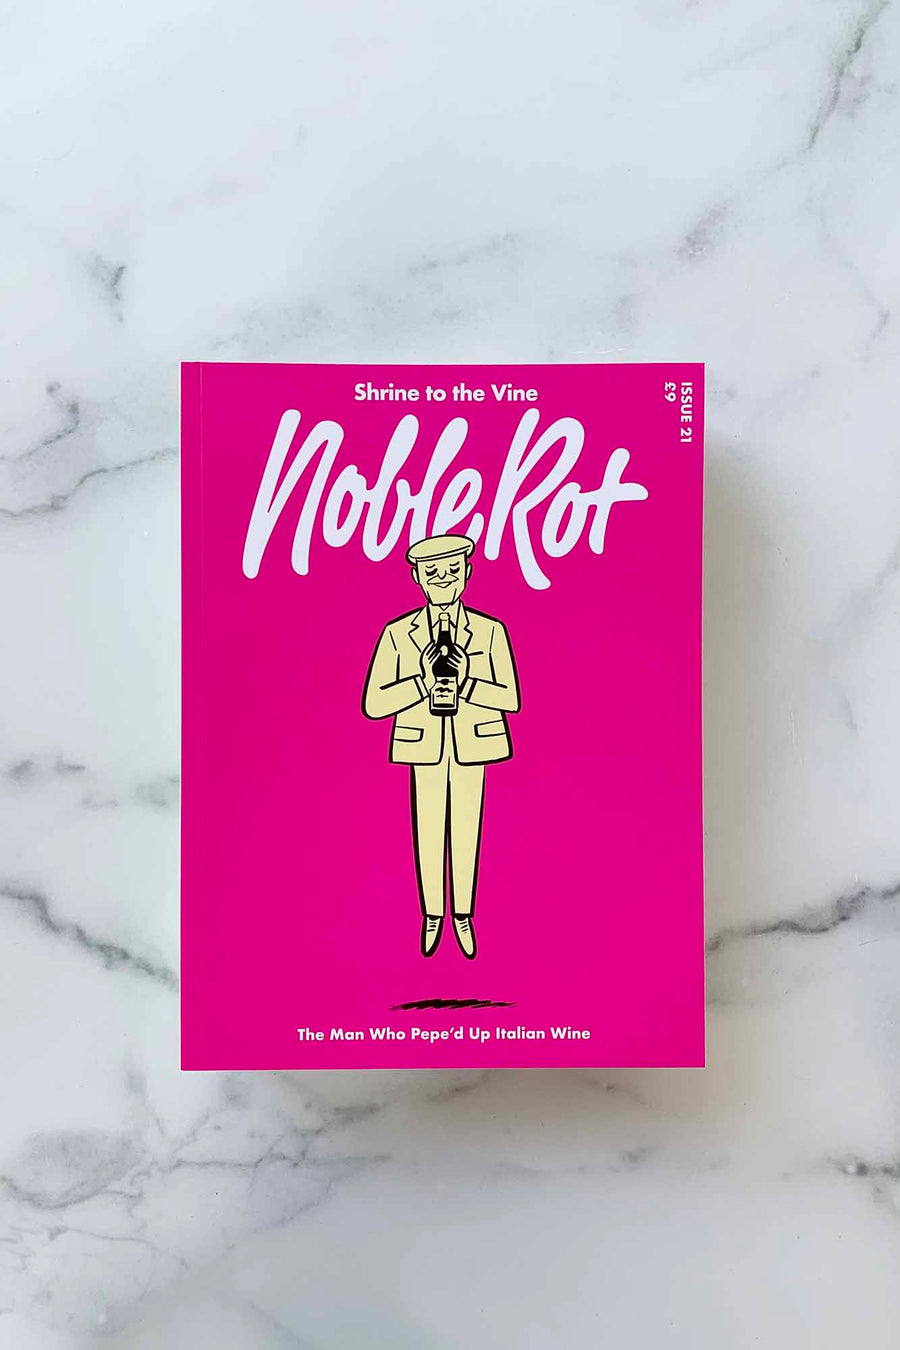 Noble Rot Issue 21